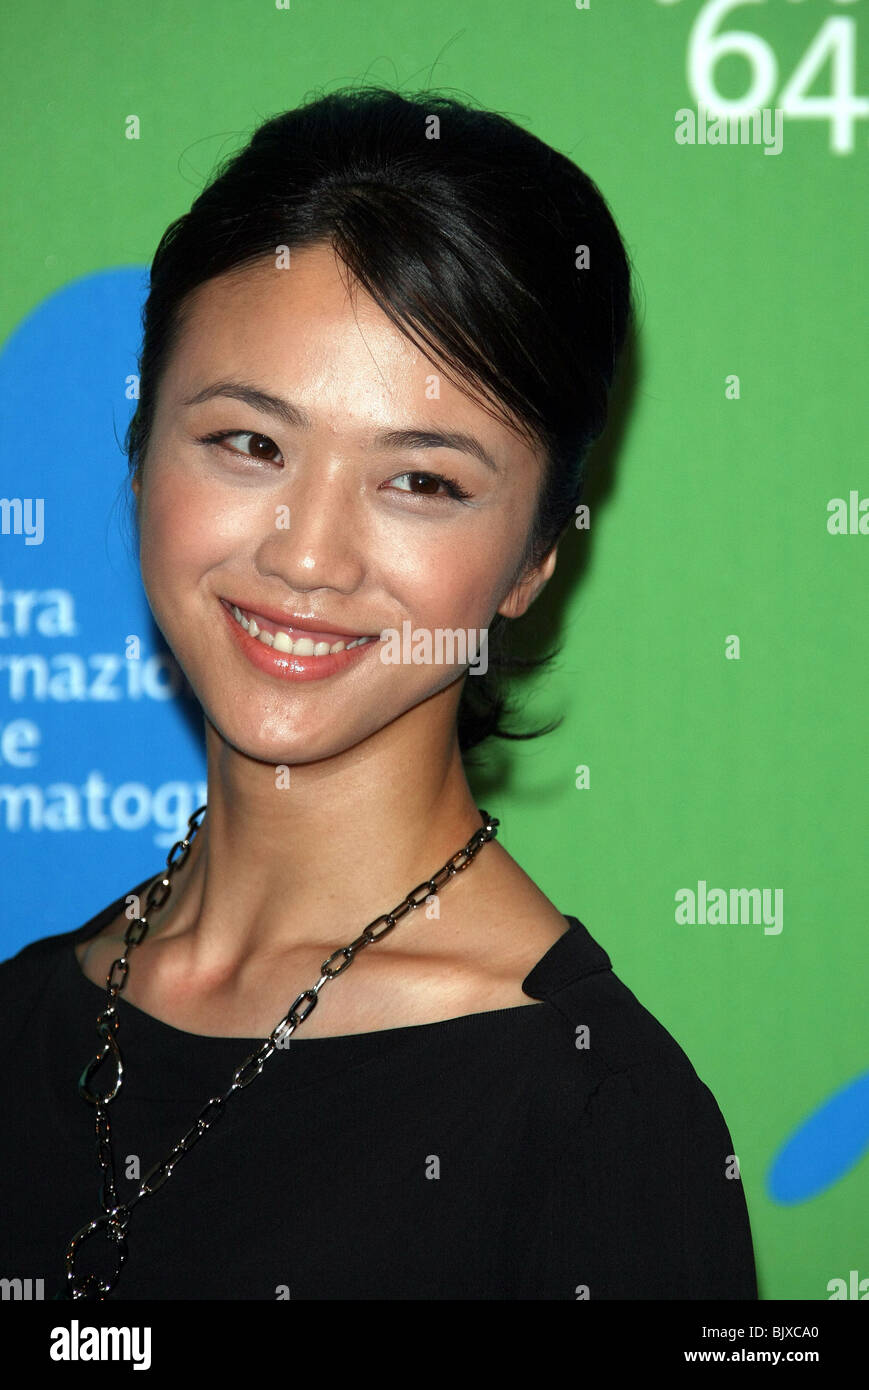 TANG WEI LUST CAUTION PHOTOCALL 64TH VENICE FILM FESTIVAL LIDO VENICE ITALY 30 August 2007 Stock Photo